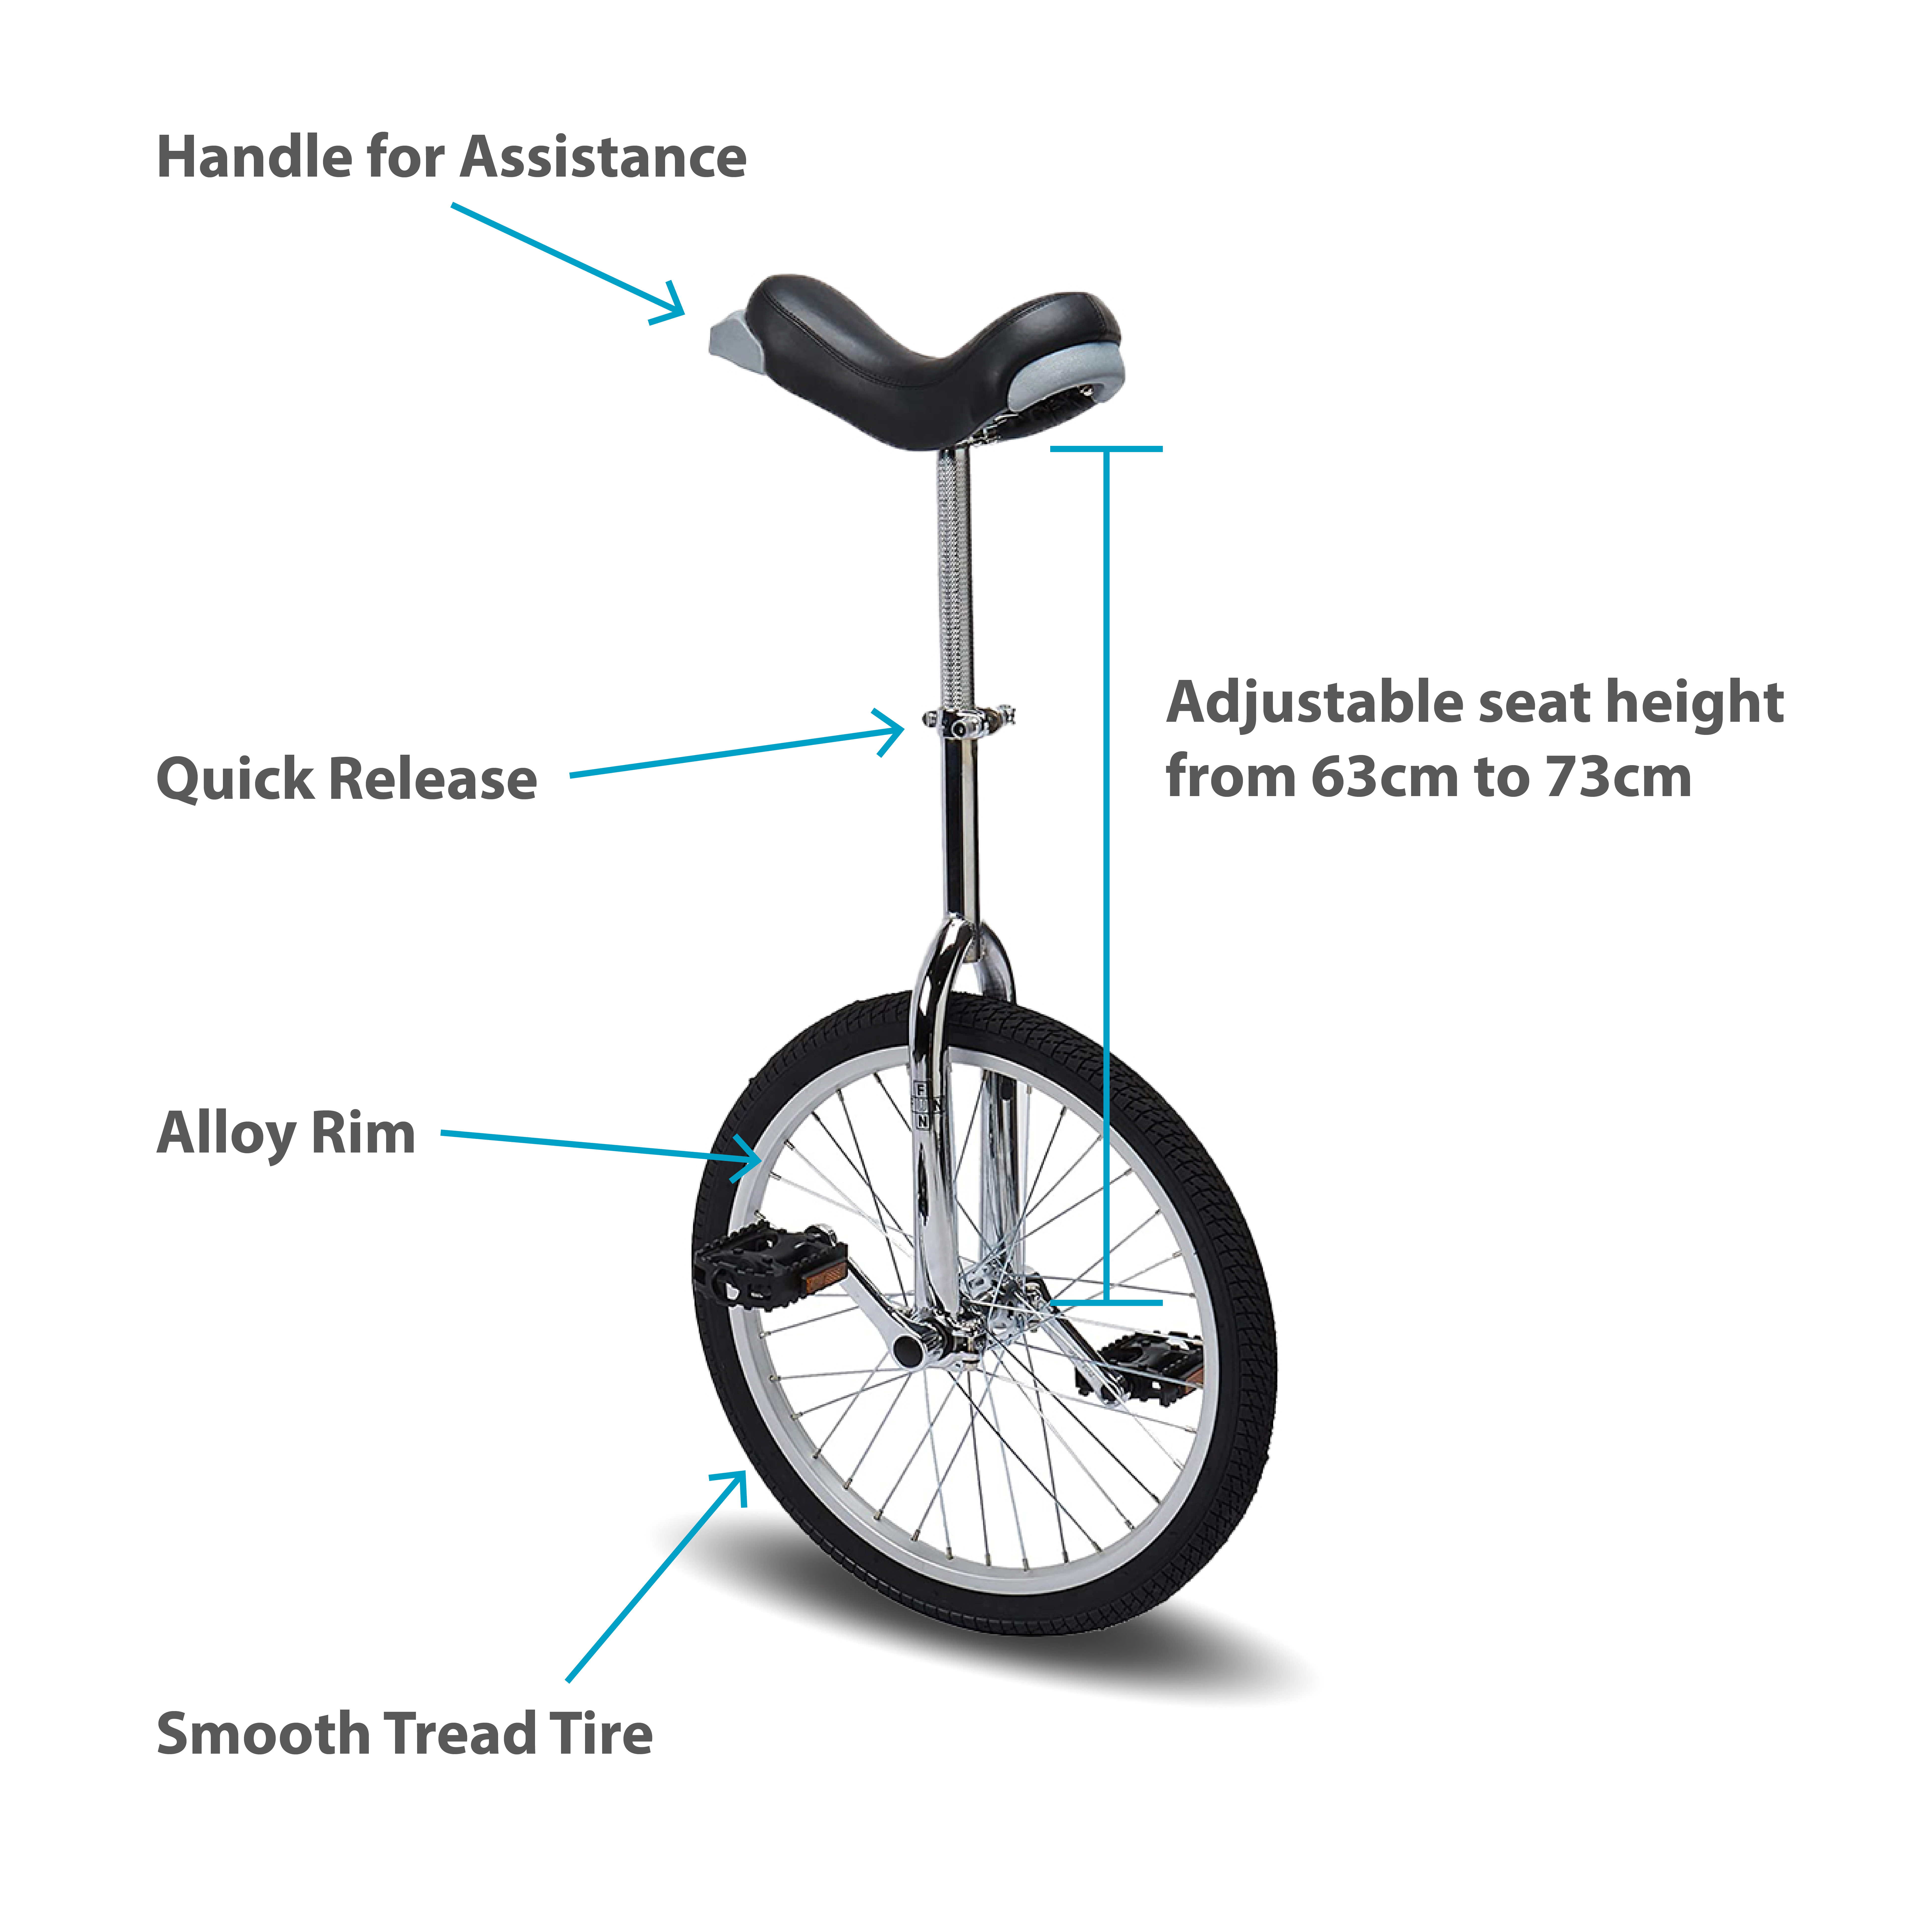 Fun 20 inch Unicycle with Alloy Rim, Chrome - image 2 of 5